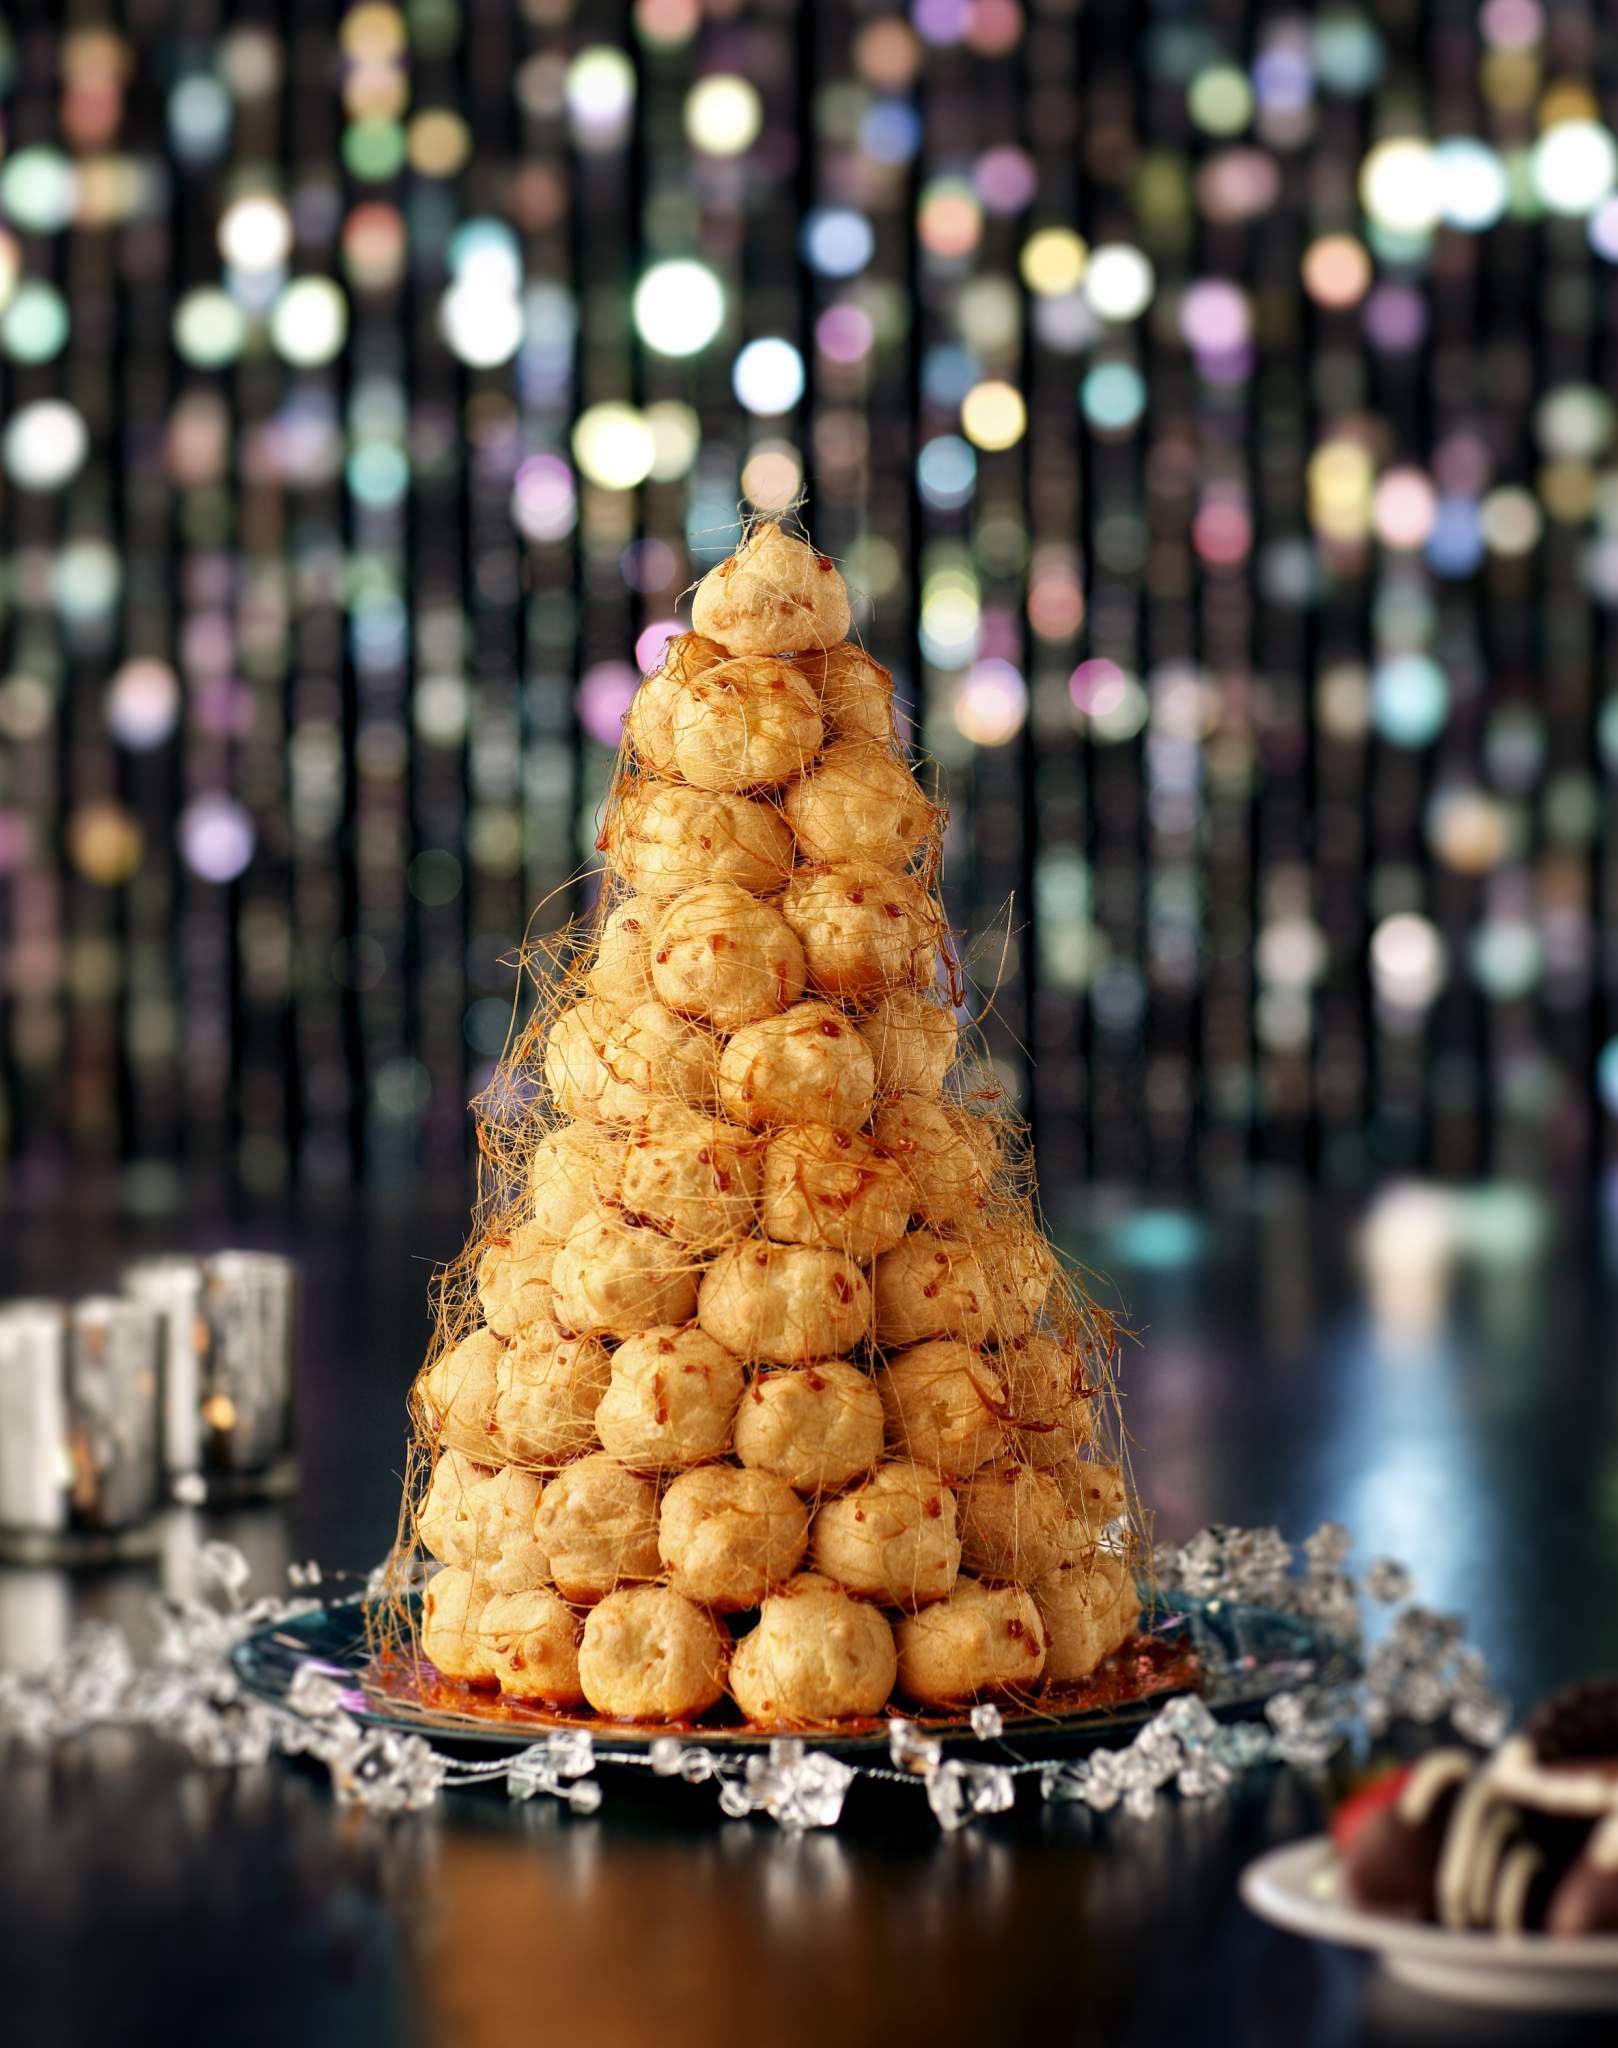 Food Photography- O Croquembouche, O Croquembouche